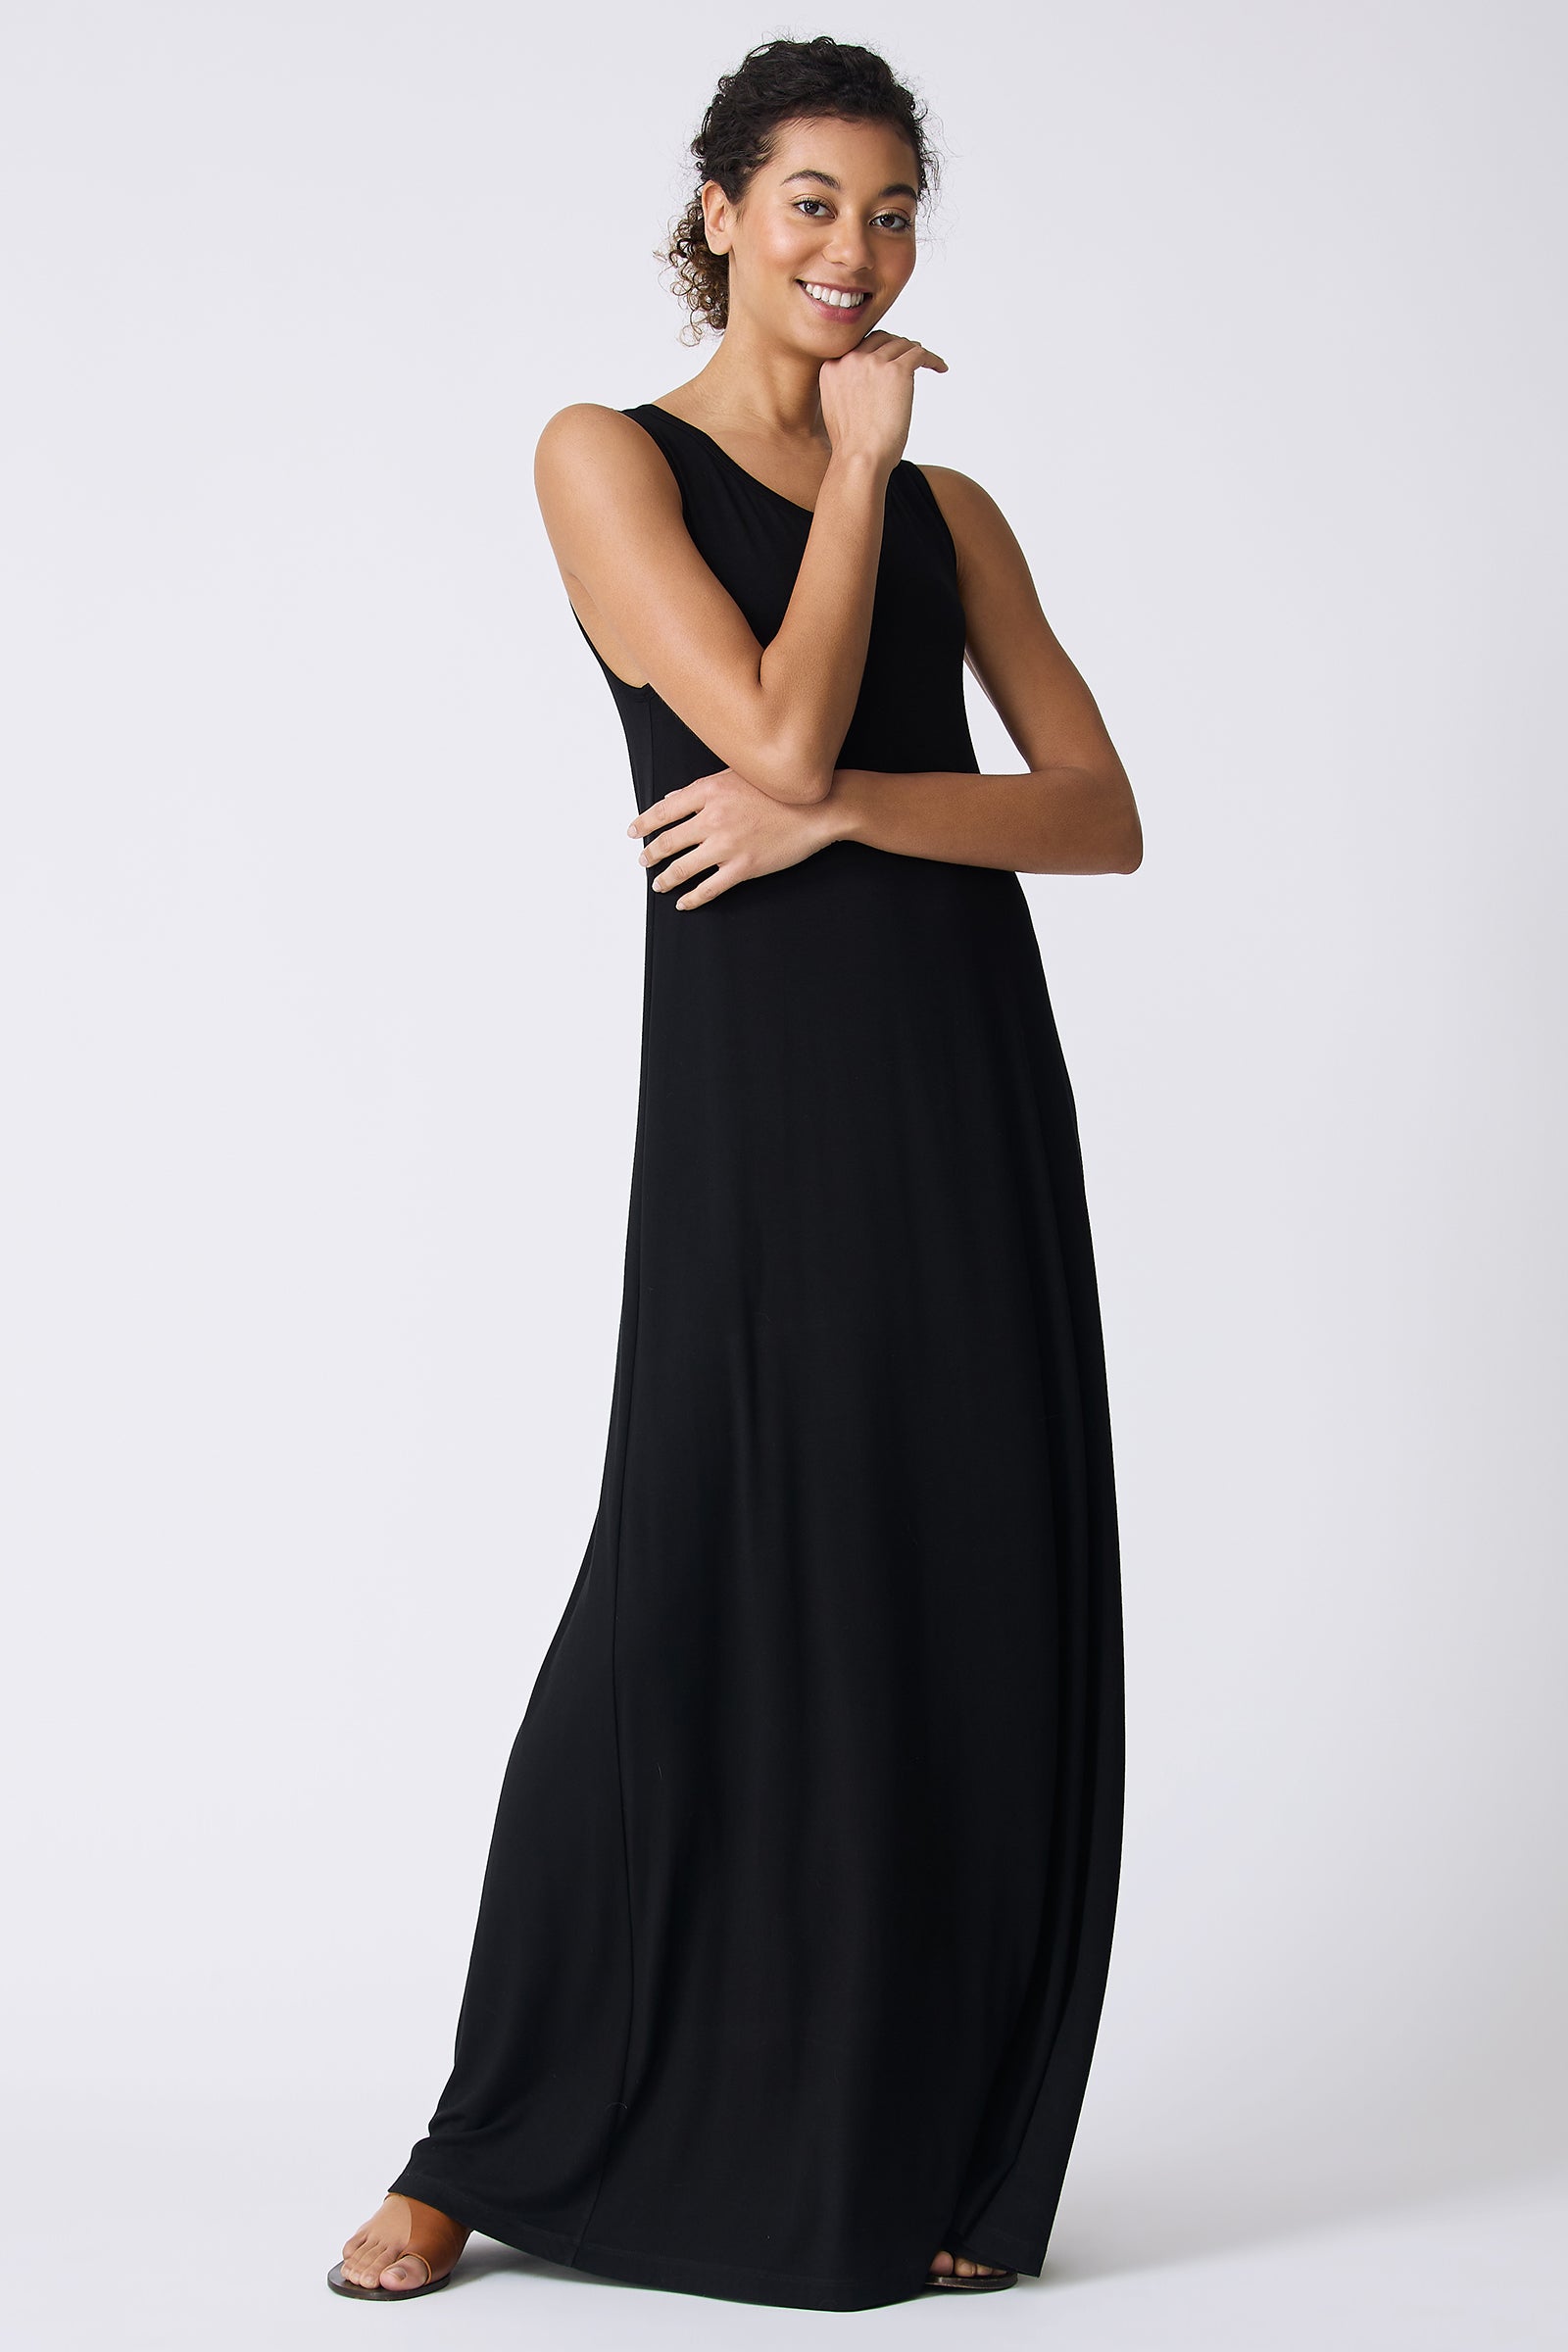 Kal Rieman Sophia Maxi Dress in Black on model with hand under chin full front view